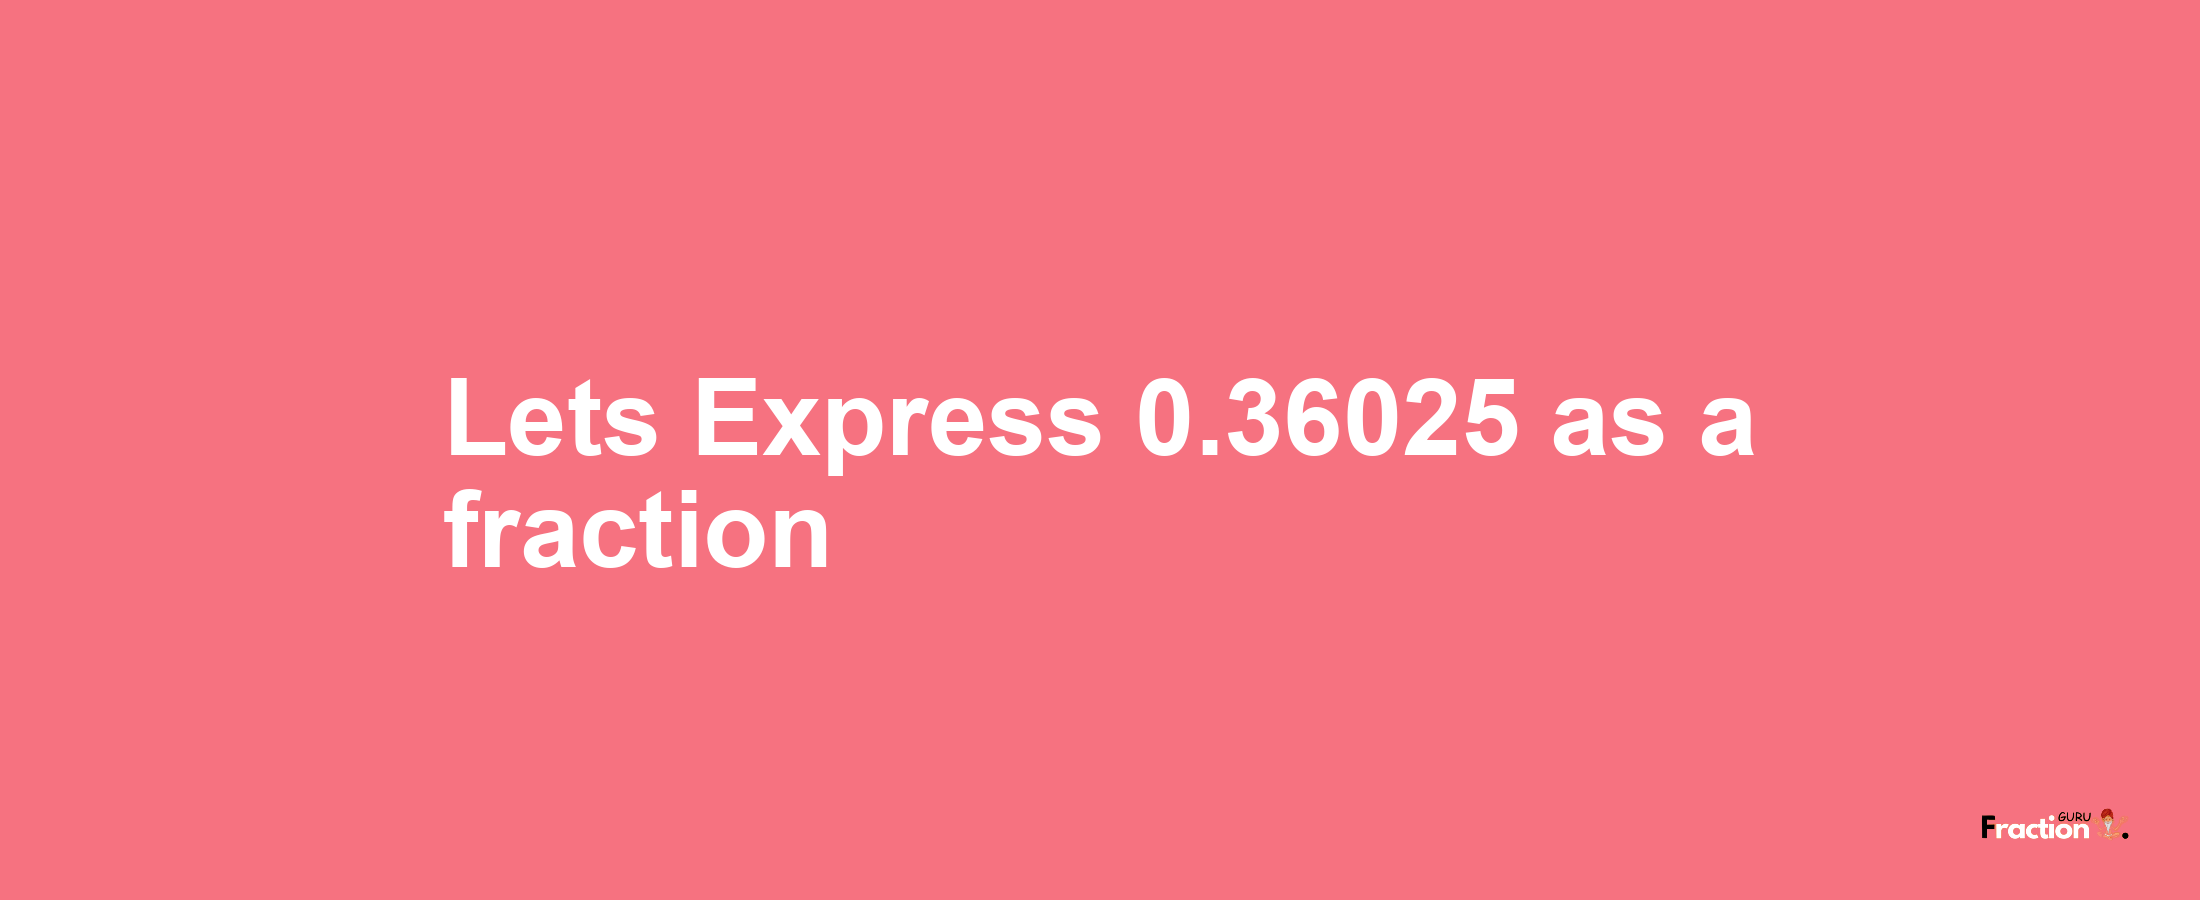 Lets Express 0.36025 as afraction